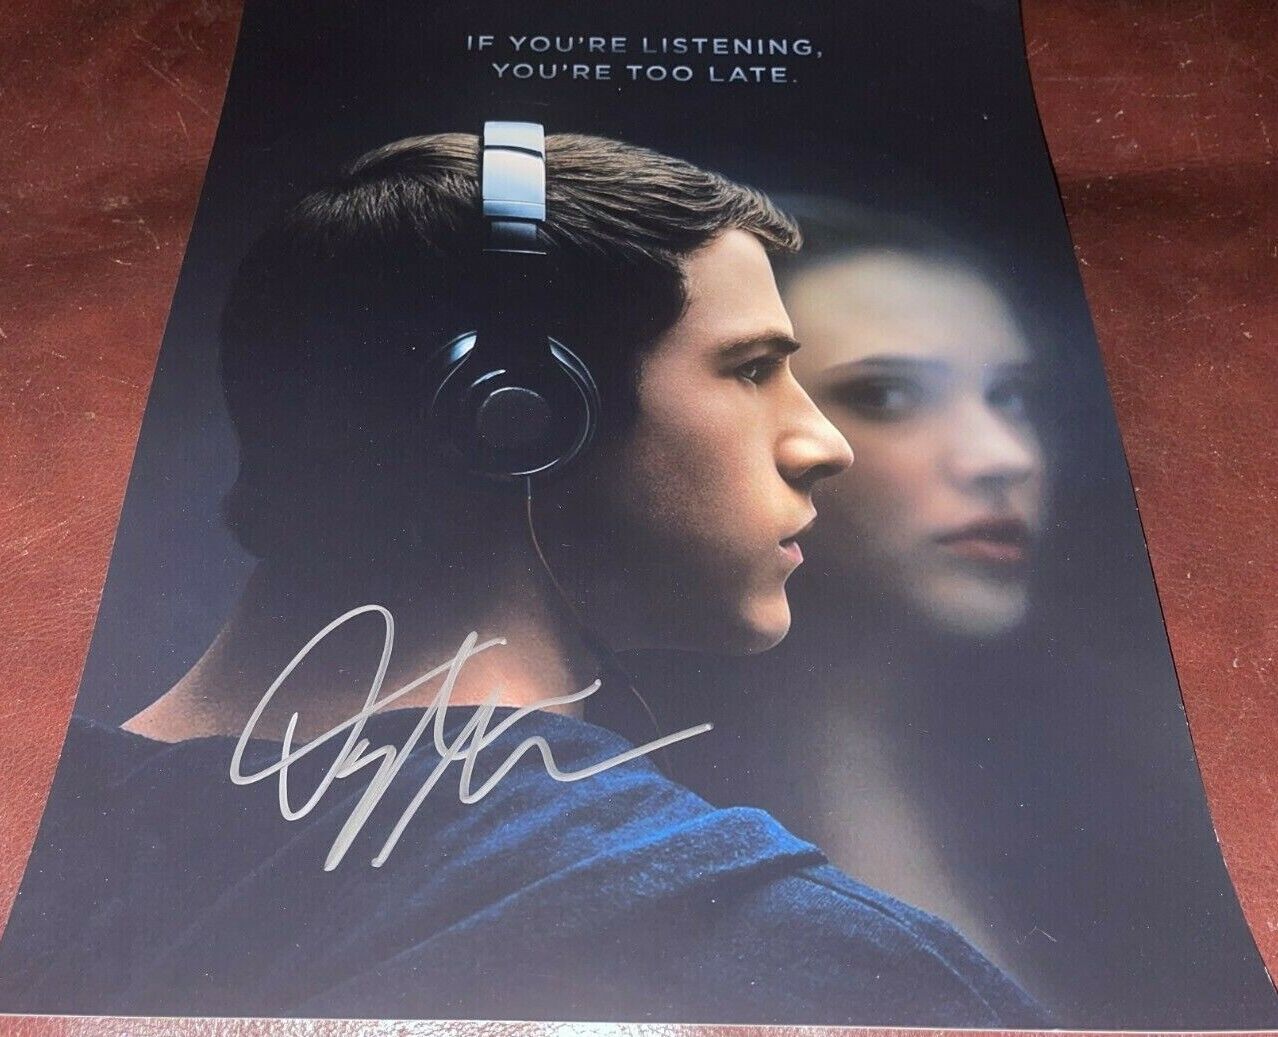 Dylan Minnette 13 Reasons Why Actor Signed 11x14 Autographed Photo Poster painting COA Proof 5